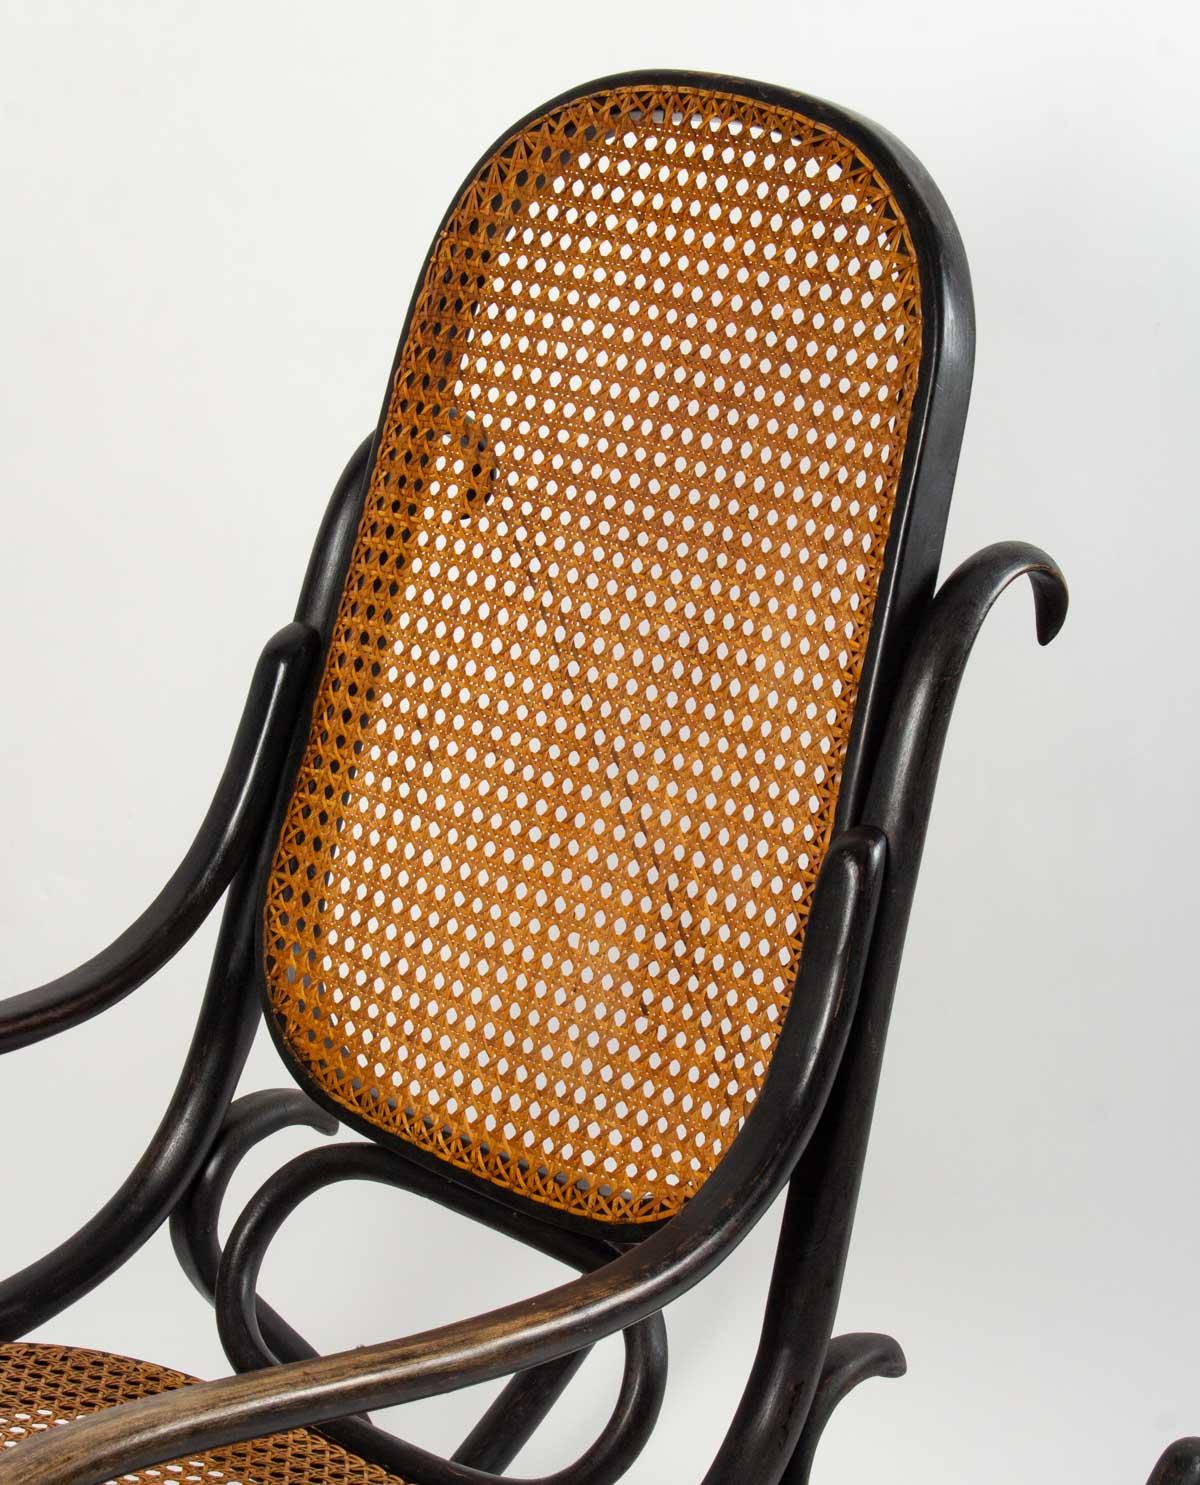 Vintage bentwood and black stained rocking chair, early 20th century.

Measures: H: 97 cm, W: 51 cm, D: 102 cm.